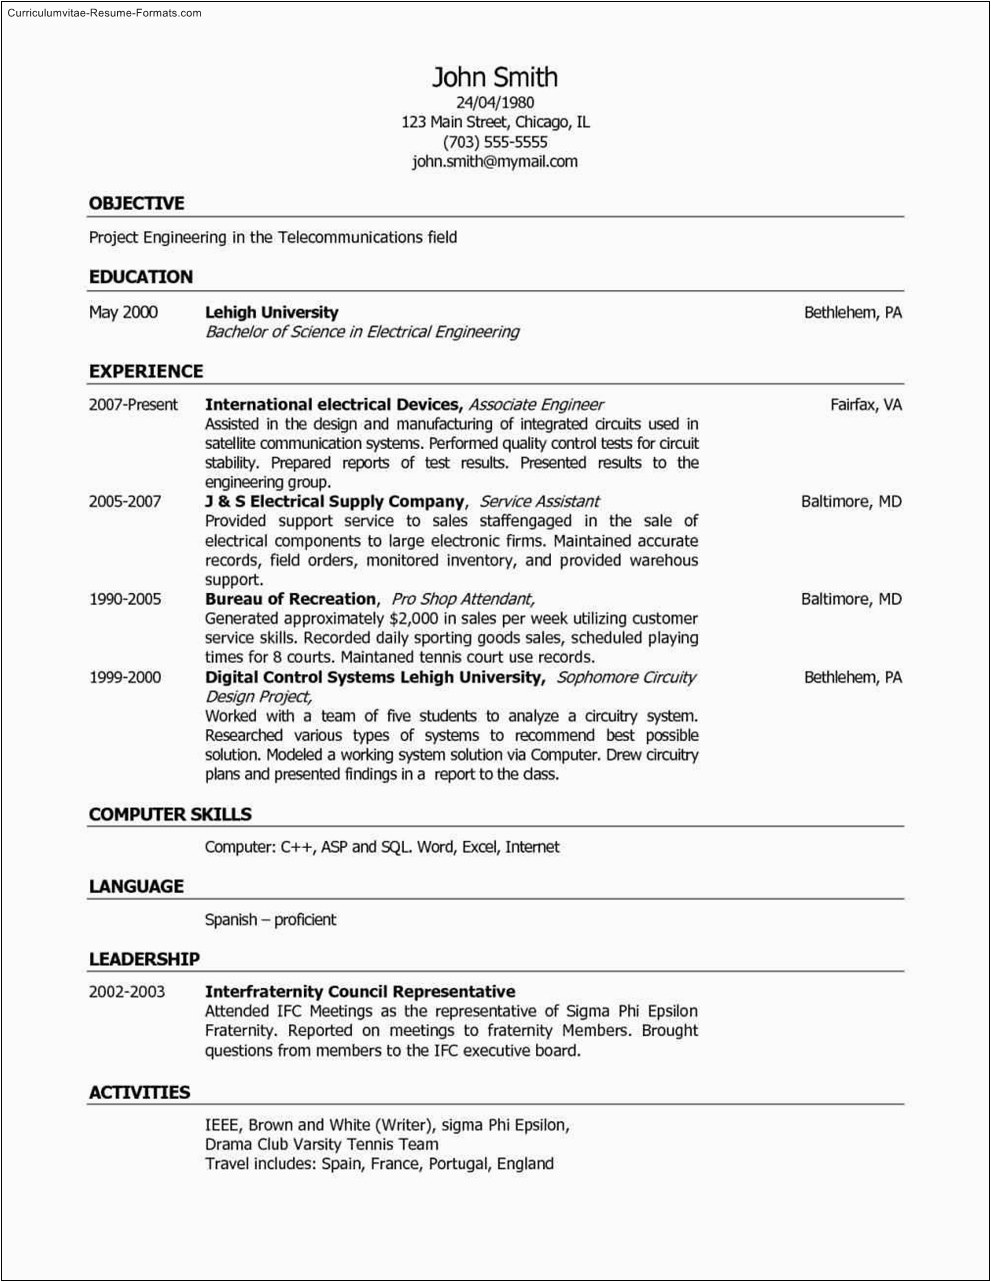 Free Resume Templates for Customer Service Jobs Customer Service Resume Template Free